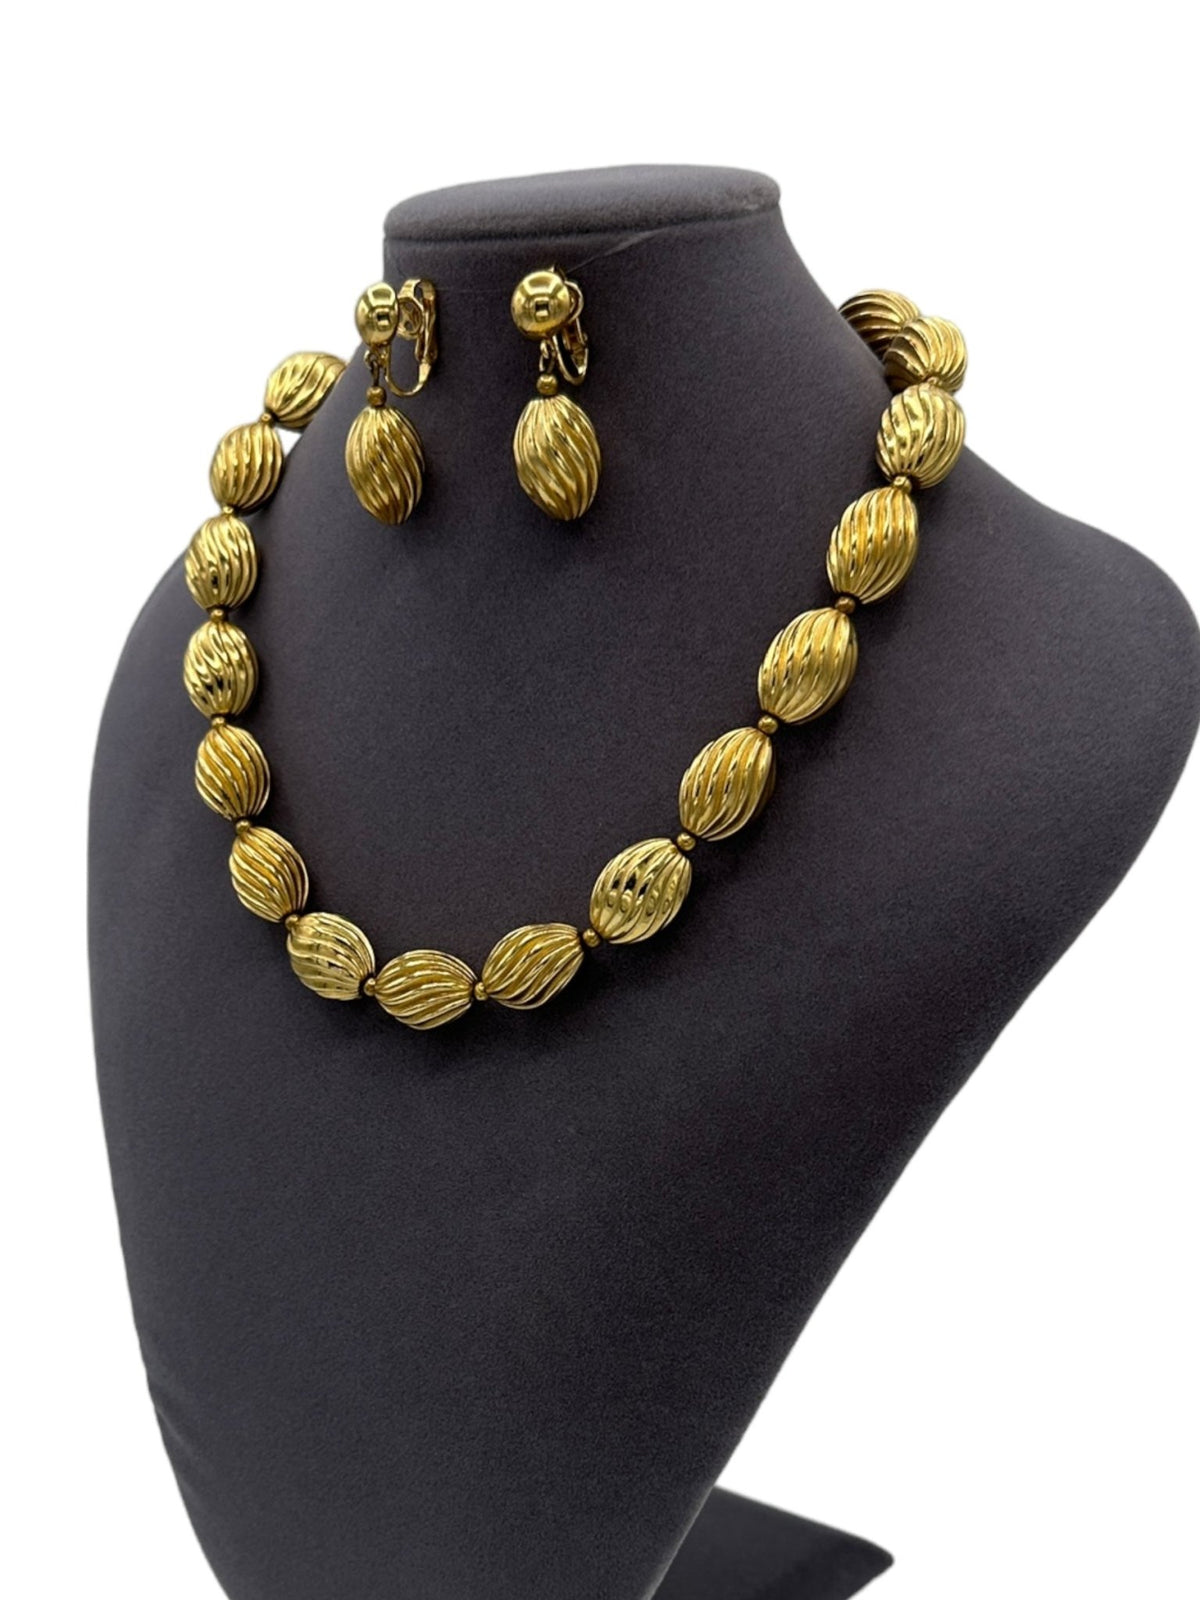 Trifari Vintage Jewelry Gold Puffy Link Necklace & Clip-On Earring Jewelry Set - 24 Wishes Vintage Jewelry